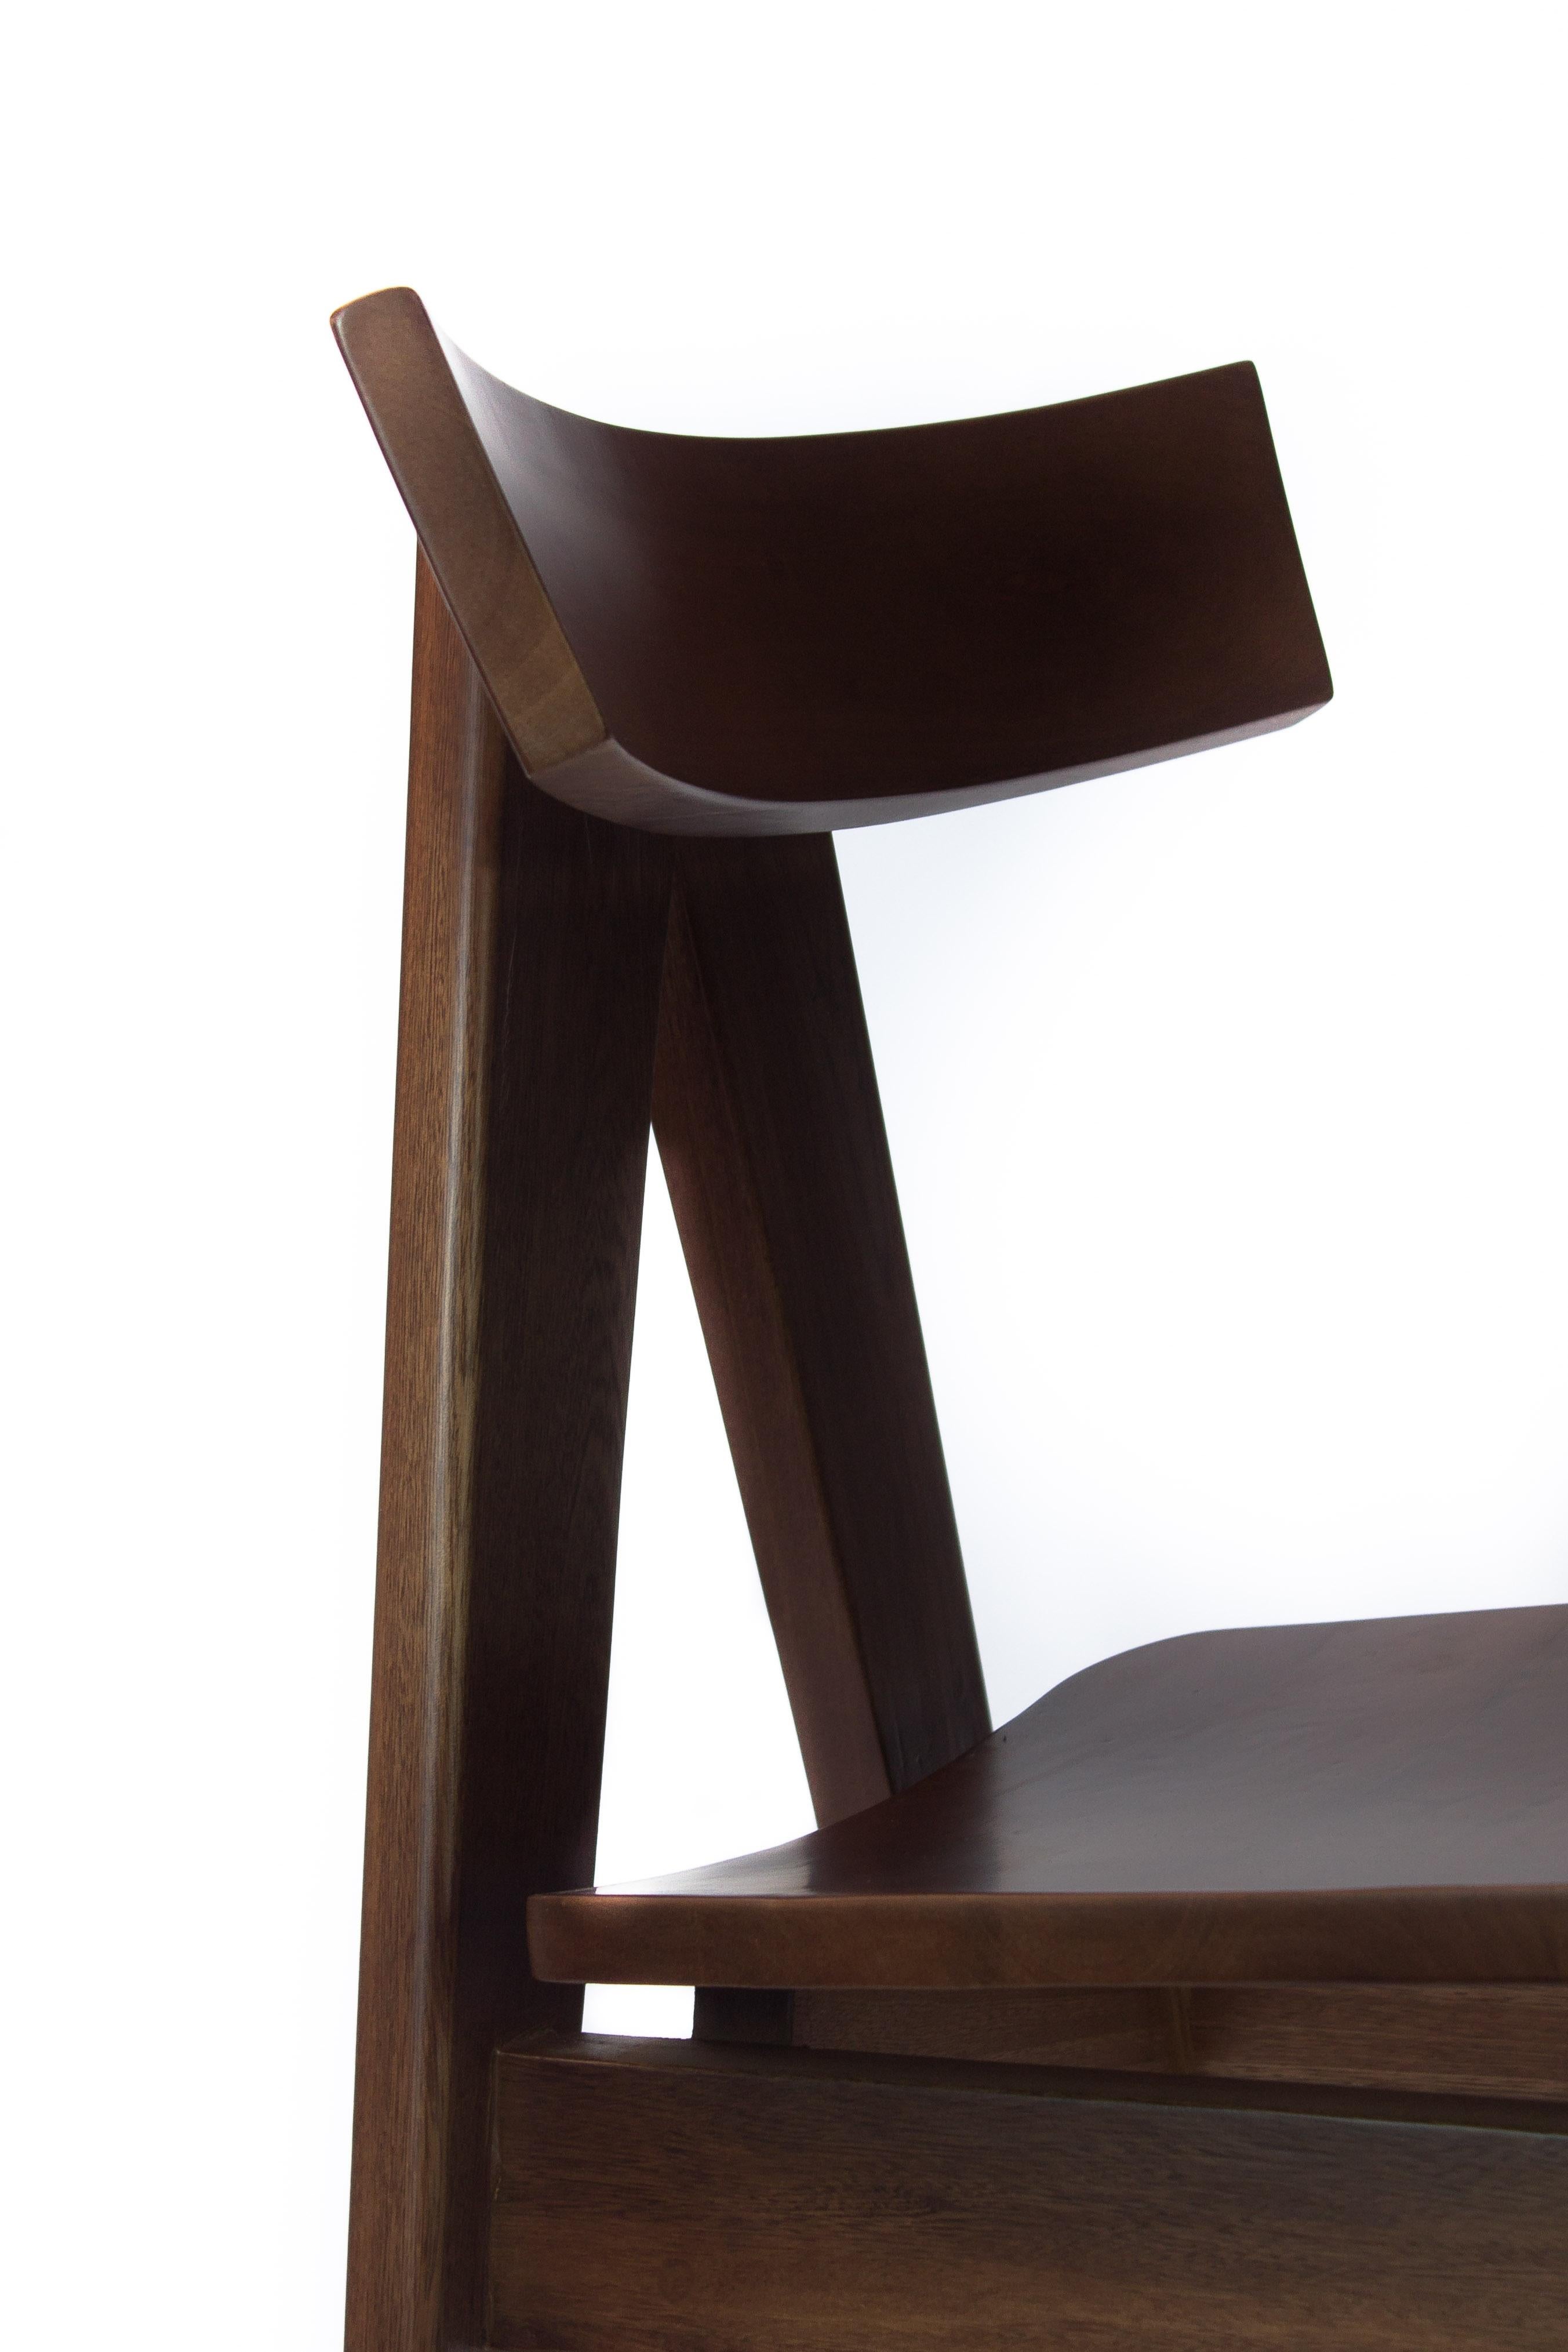 Wood Marques Chair, by Camilo Andres Rodriguez Marquez